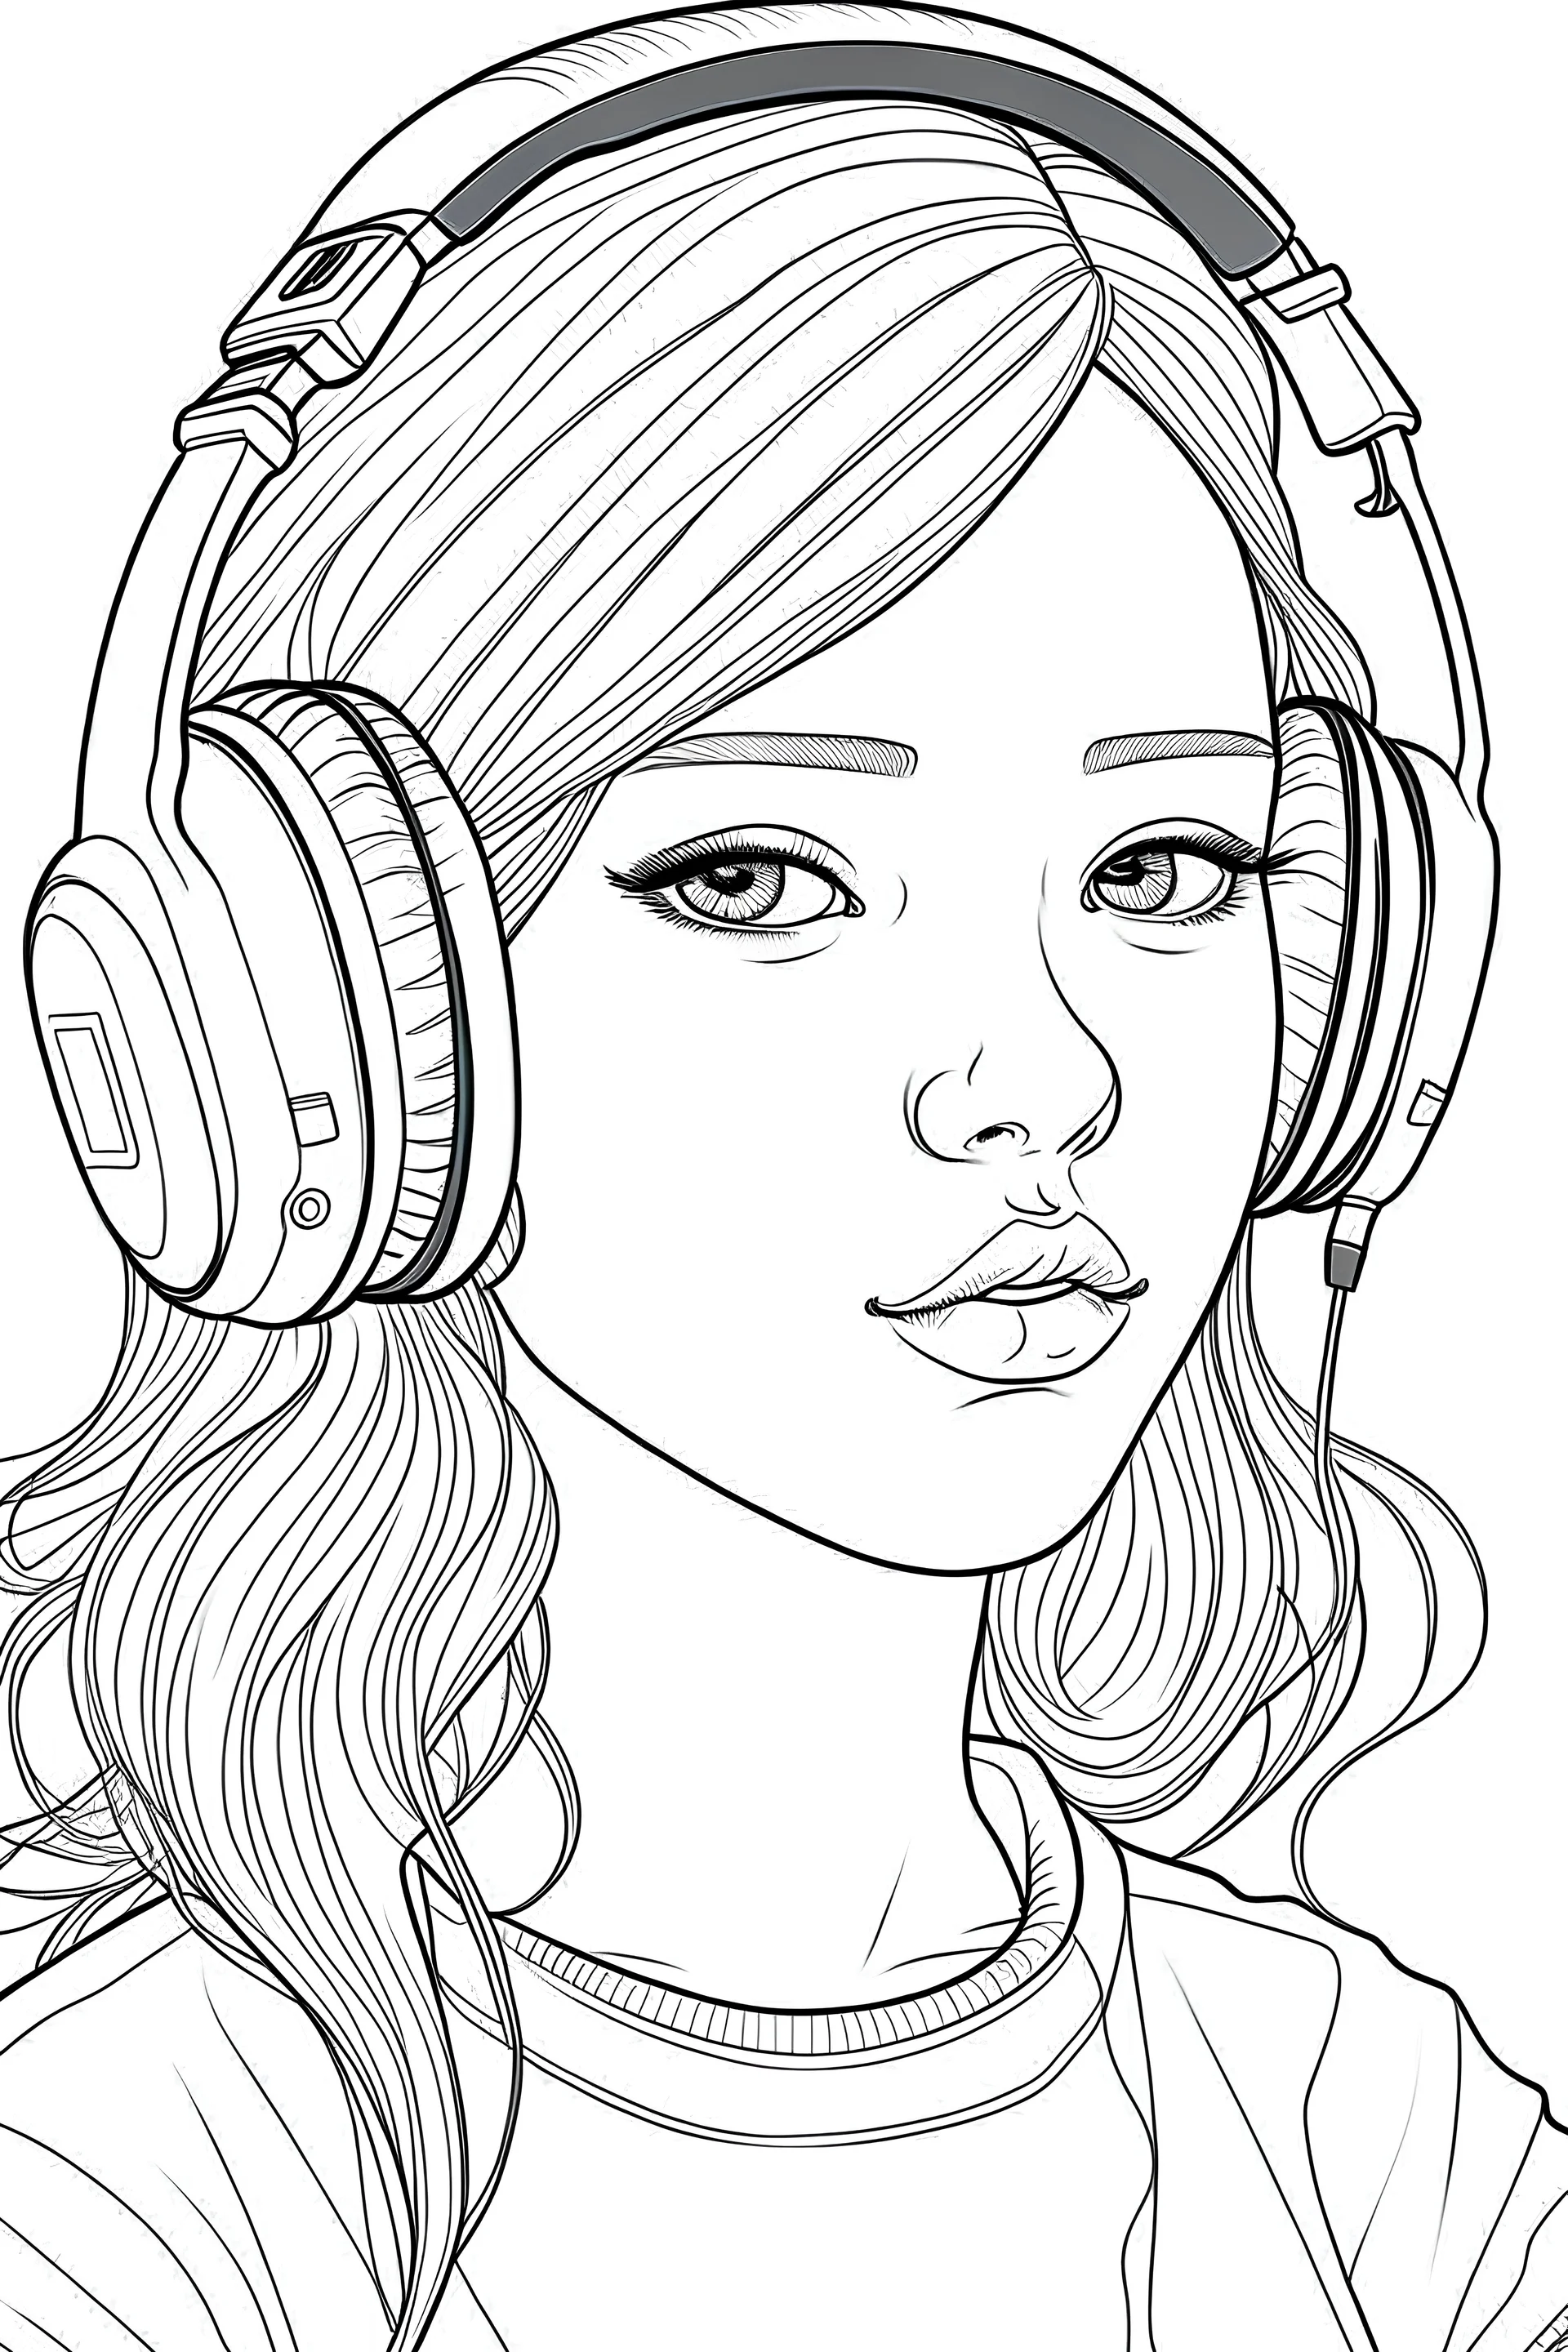 Outline art of a sweet girl with headphones